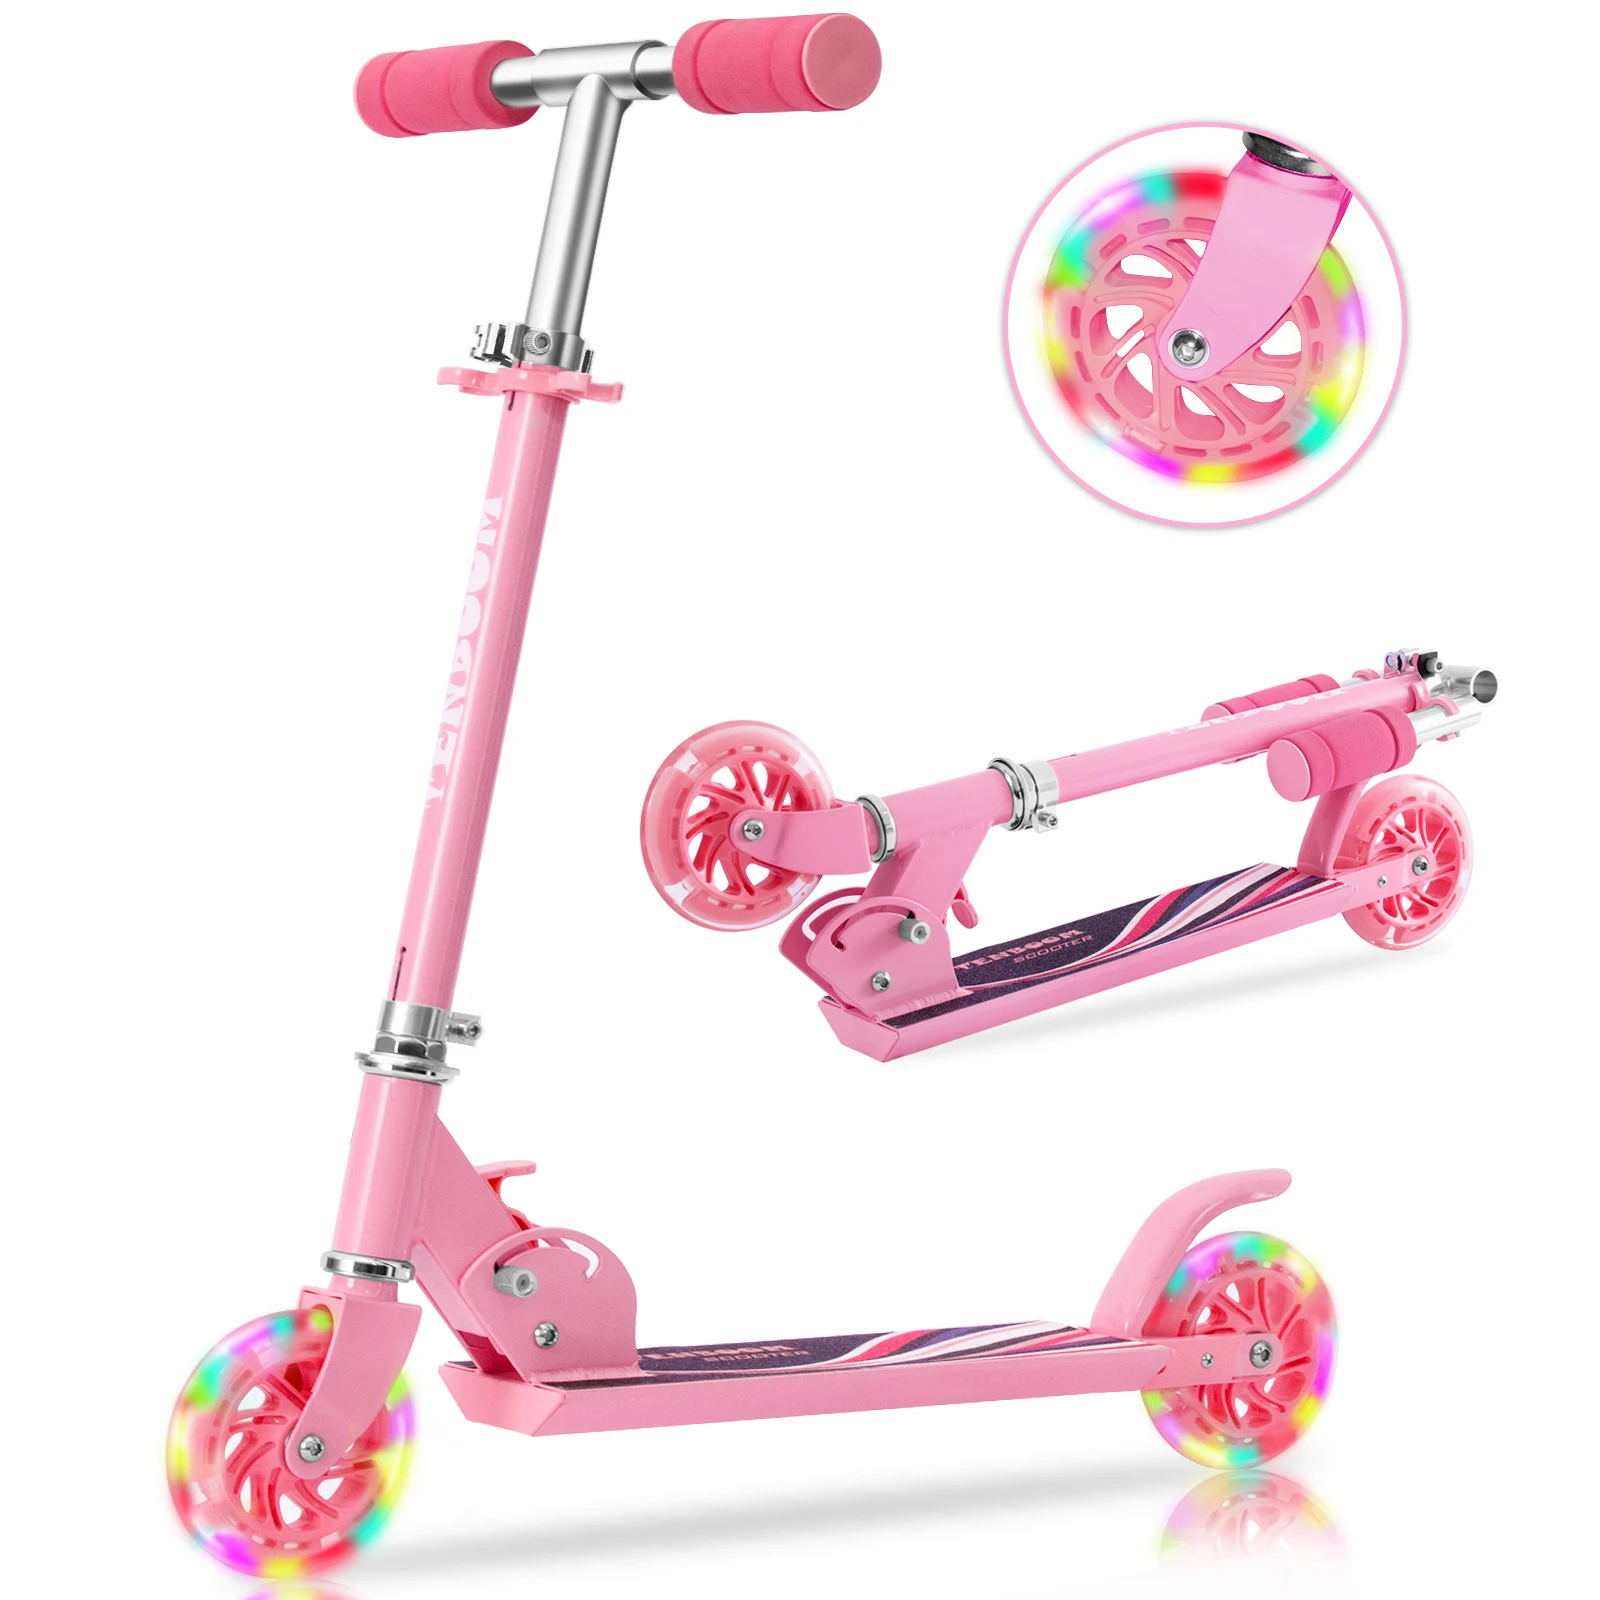 

Scooters for Kids 2 Wheel Folding Kick Scooter for Girls Boys, 3 Adjustable Height, Light Up Wheels for Children 3 to 14 Years, Customized color